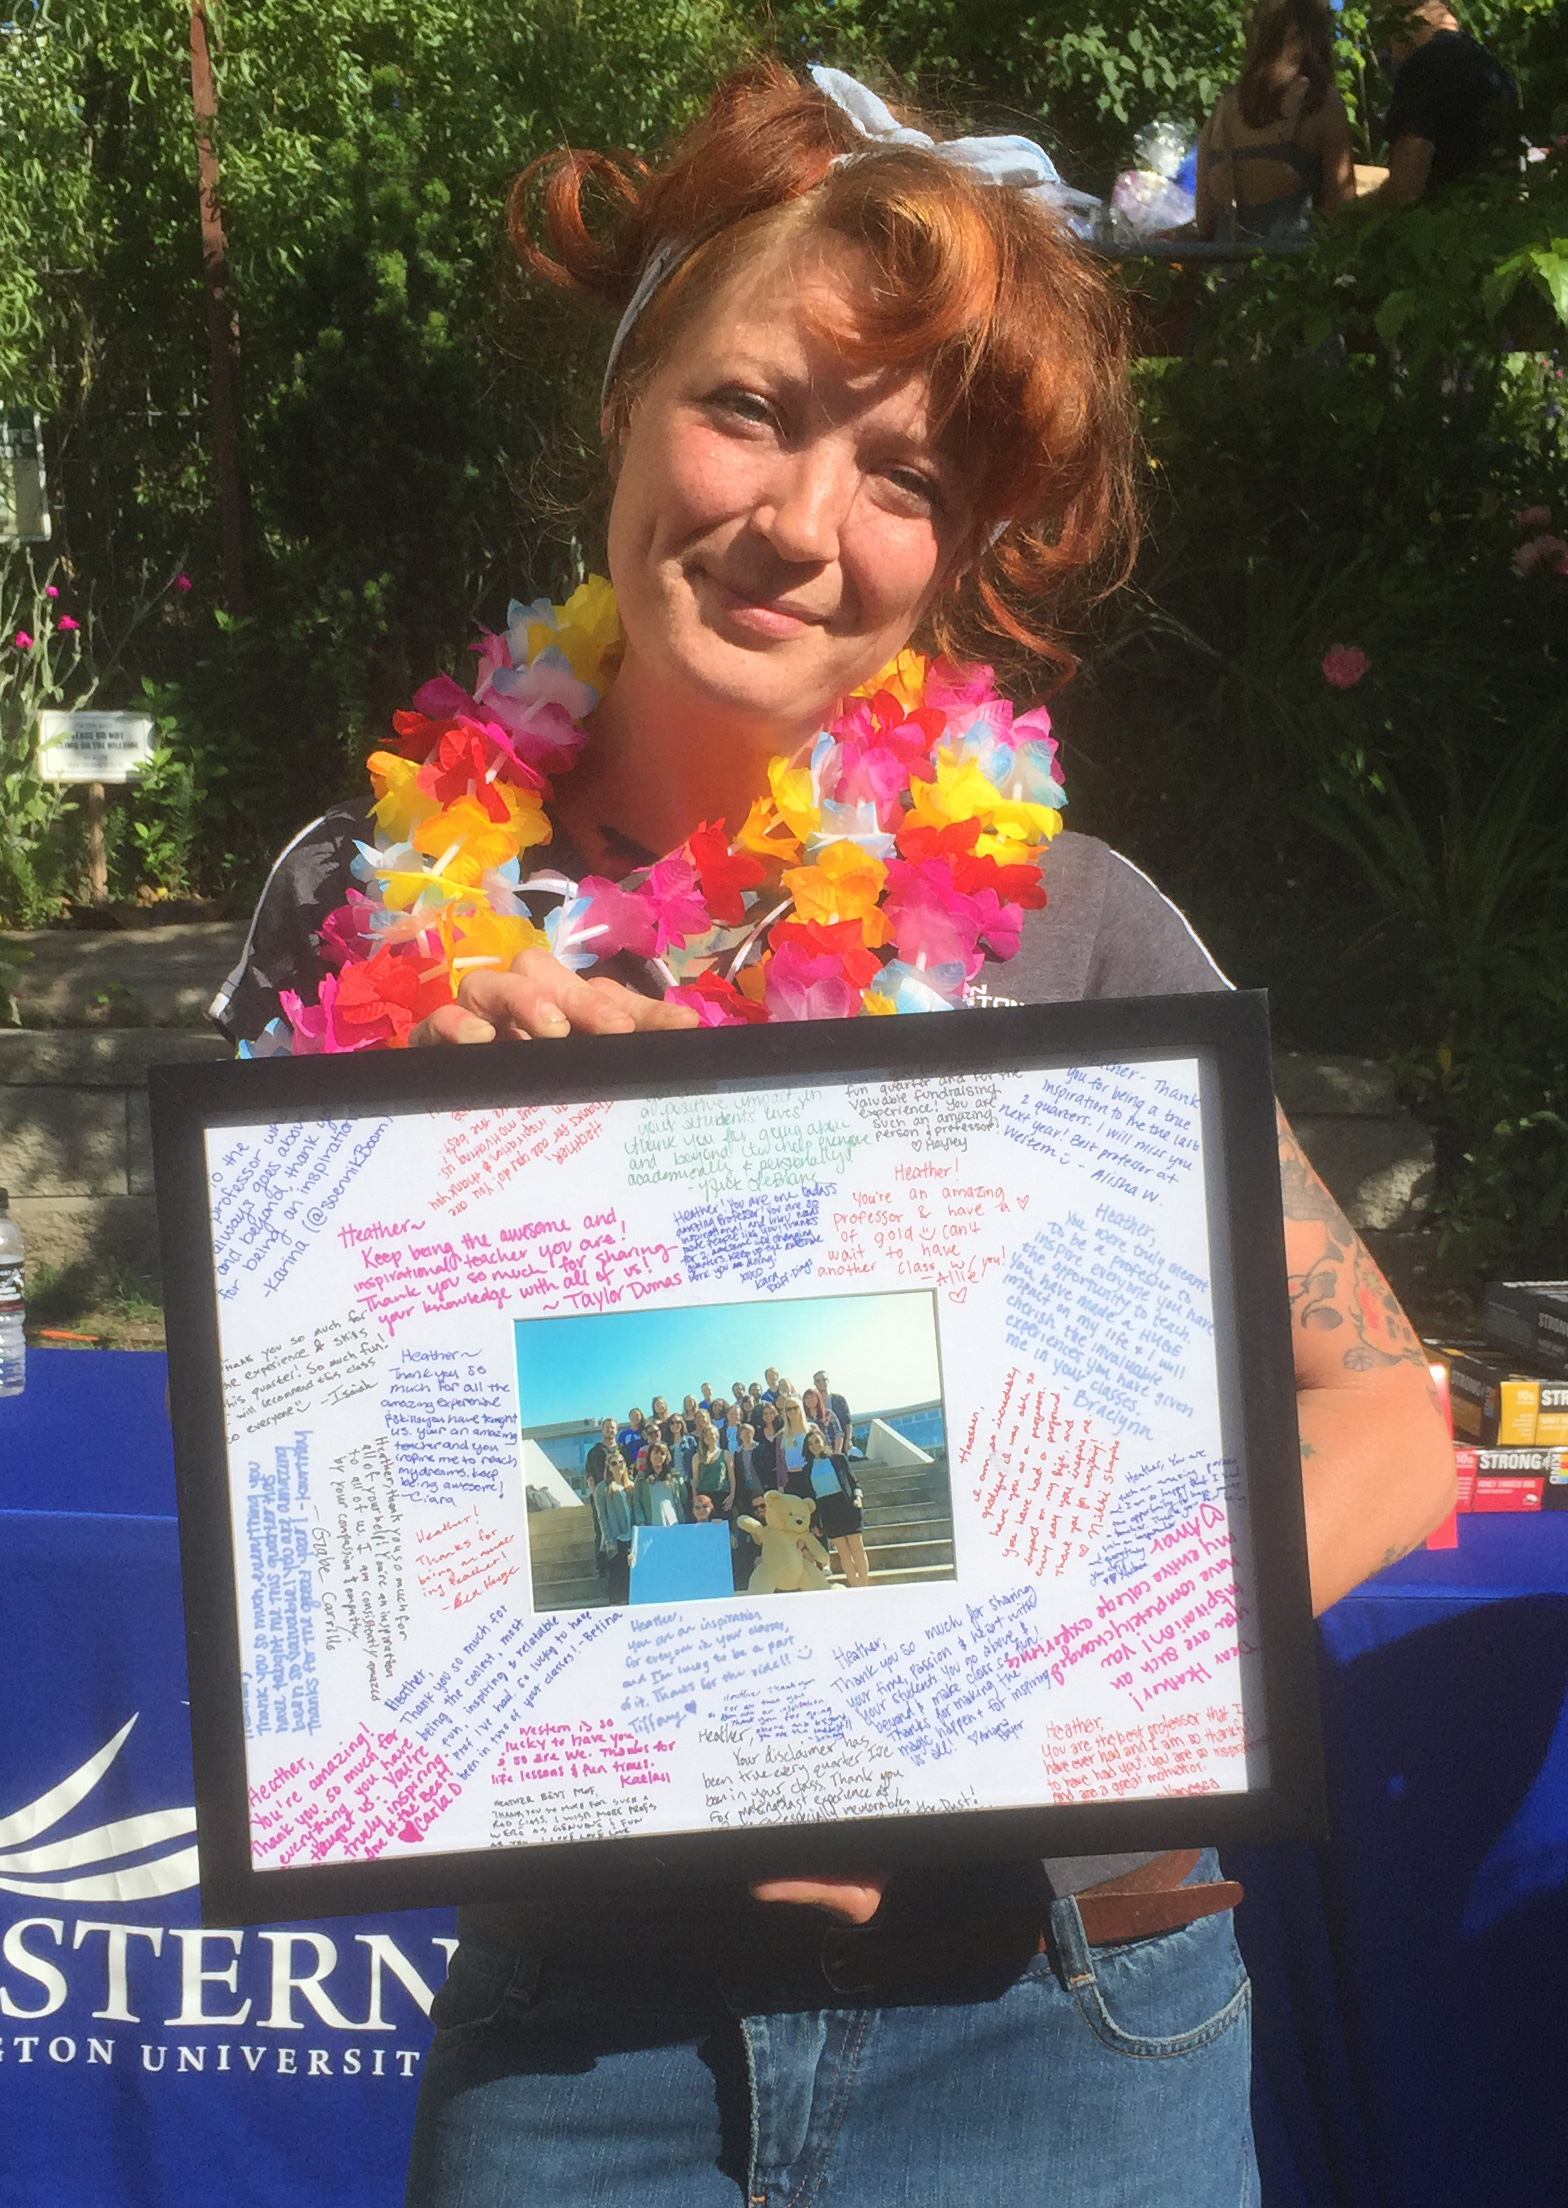 Holding a framed and signed picture of the students with the stuffed bear.